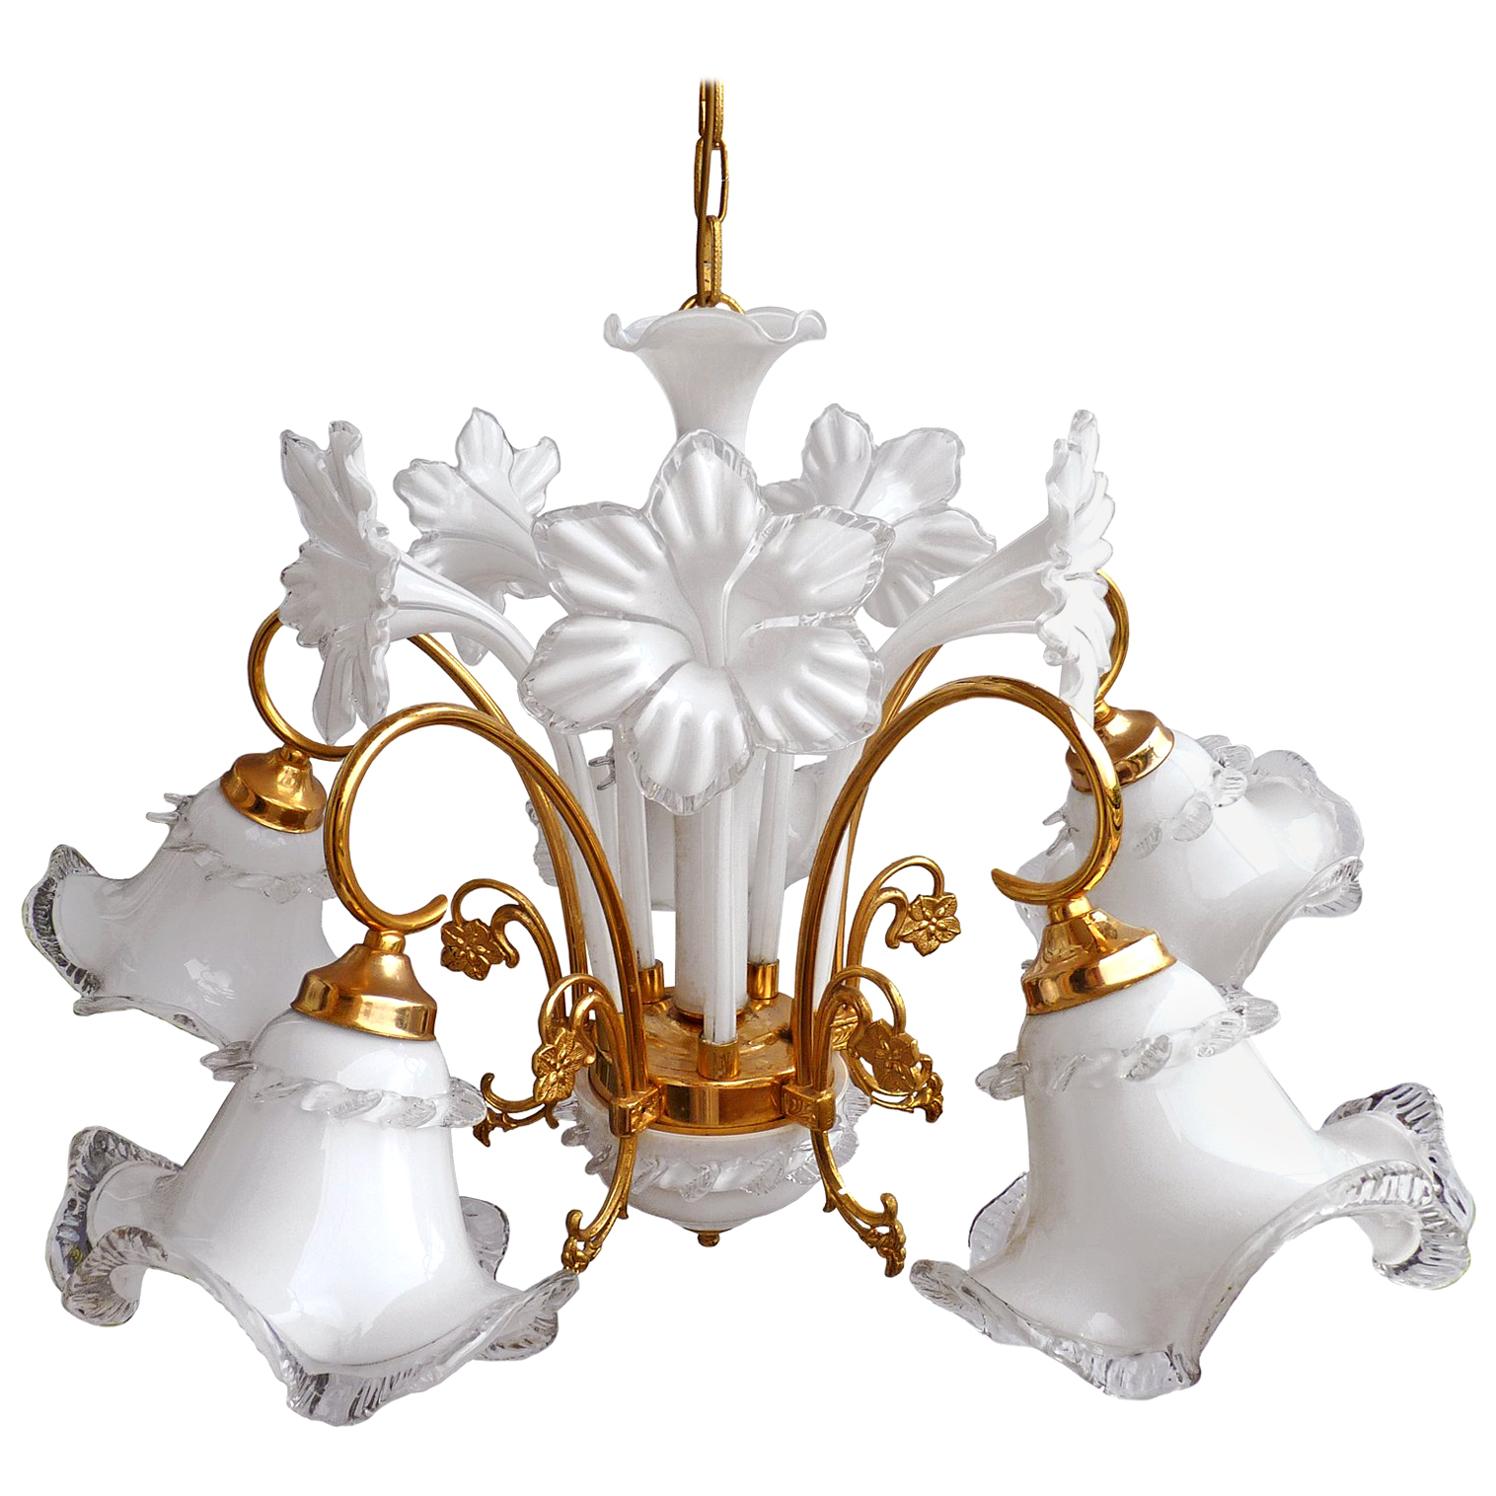 Awesome Italian Murano hand blown art glass chandelier/ Mid-Century Modernist/ vintage, 1970s
Materials: Hand blown glass (white and clear glass) and gold-plated metal
Measures:
Height 36 in =24 in + 20 in/chain (90 cm= 60 cm + 30 cm/